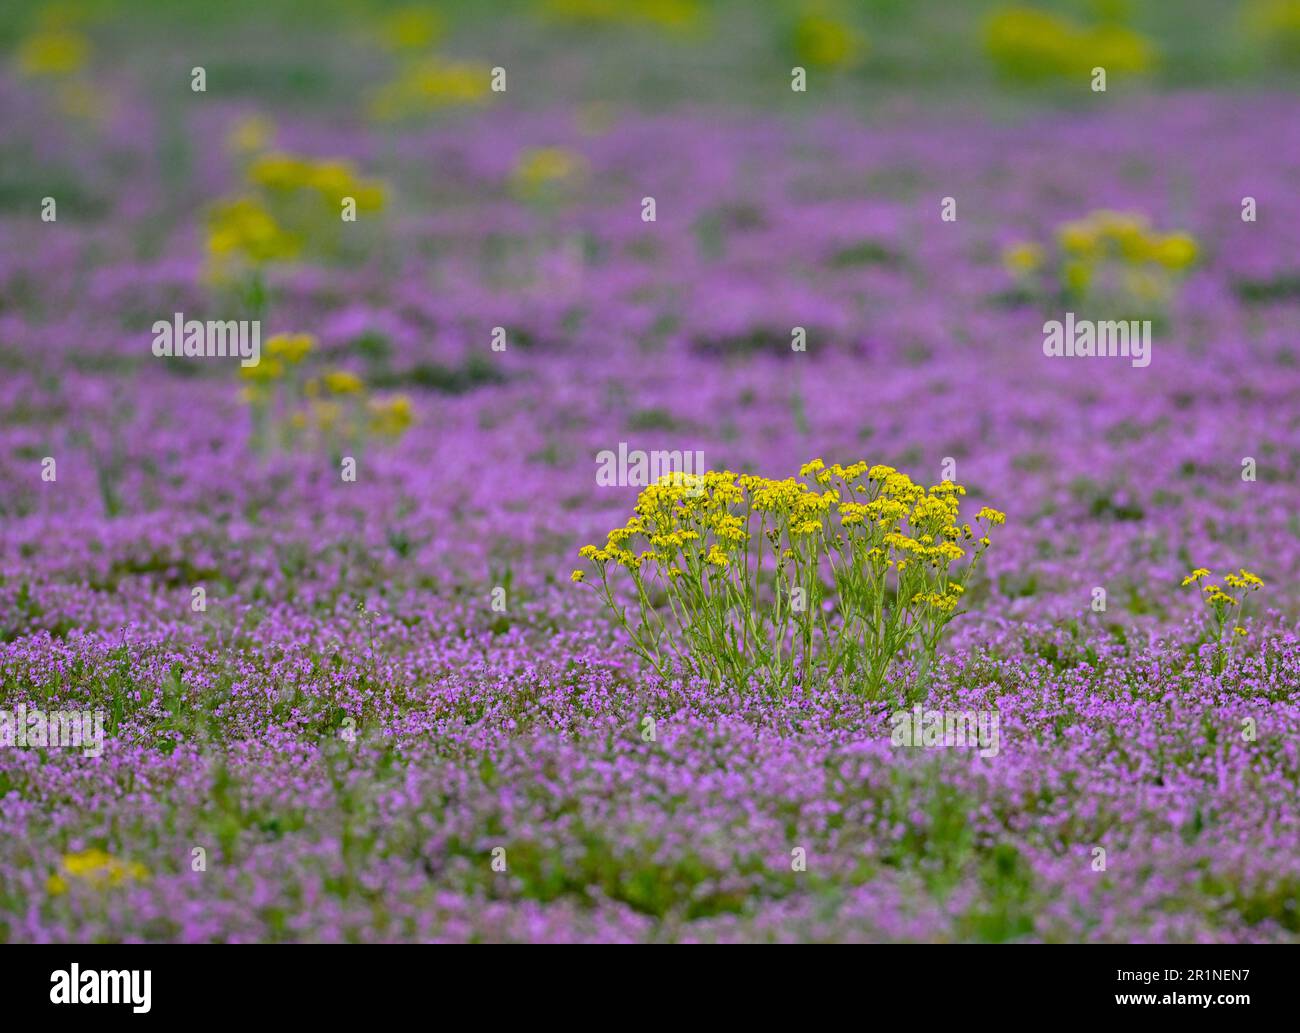 15 May 2023, Brandenburg, Jacobsdorf: A colorful carpet on a fallow field of purple flowers is formed by the common heron's beak (Erodium cicutarium) together with the yellow flowers of the golden ragwort (Senecio aureus). The weather outlook for Berlin and Brandenburg this week is rather gloomy. The reason for the changeable weather over the next few days is the influence of a low pressure system moving from Poland towards Scandinavia, according to the German Weather Service (DWD). Monday begins cloudy and partly slightly rainy. From noon, there will be widespread showers and thunderstorms, p Stock Photo